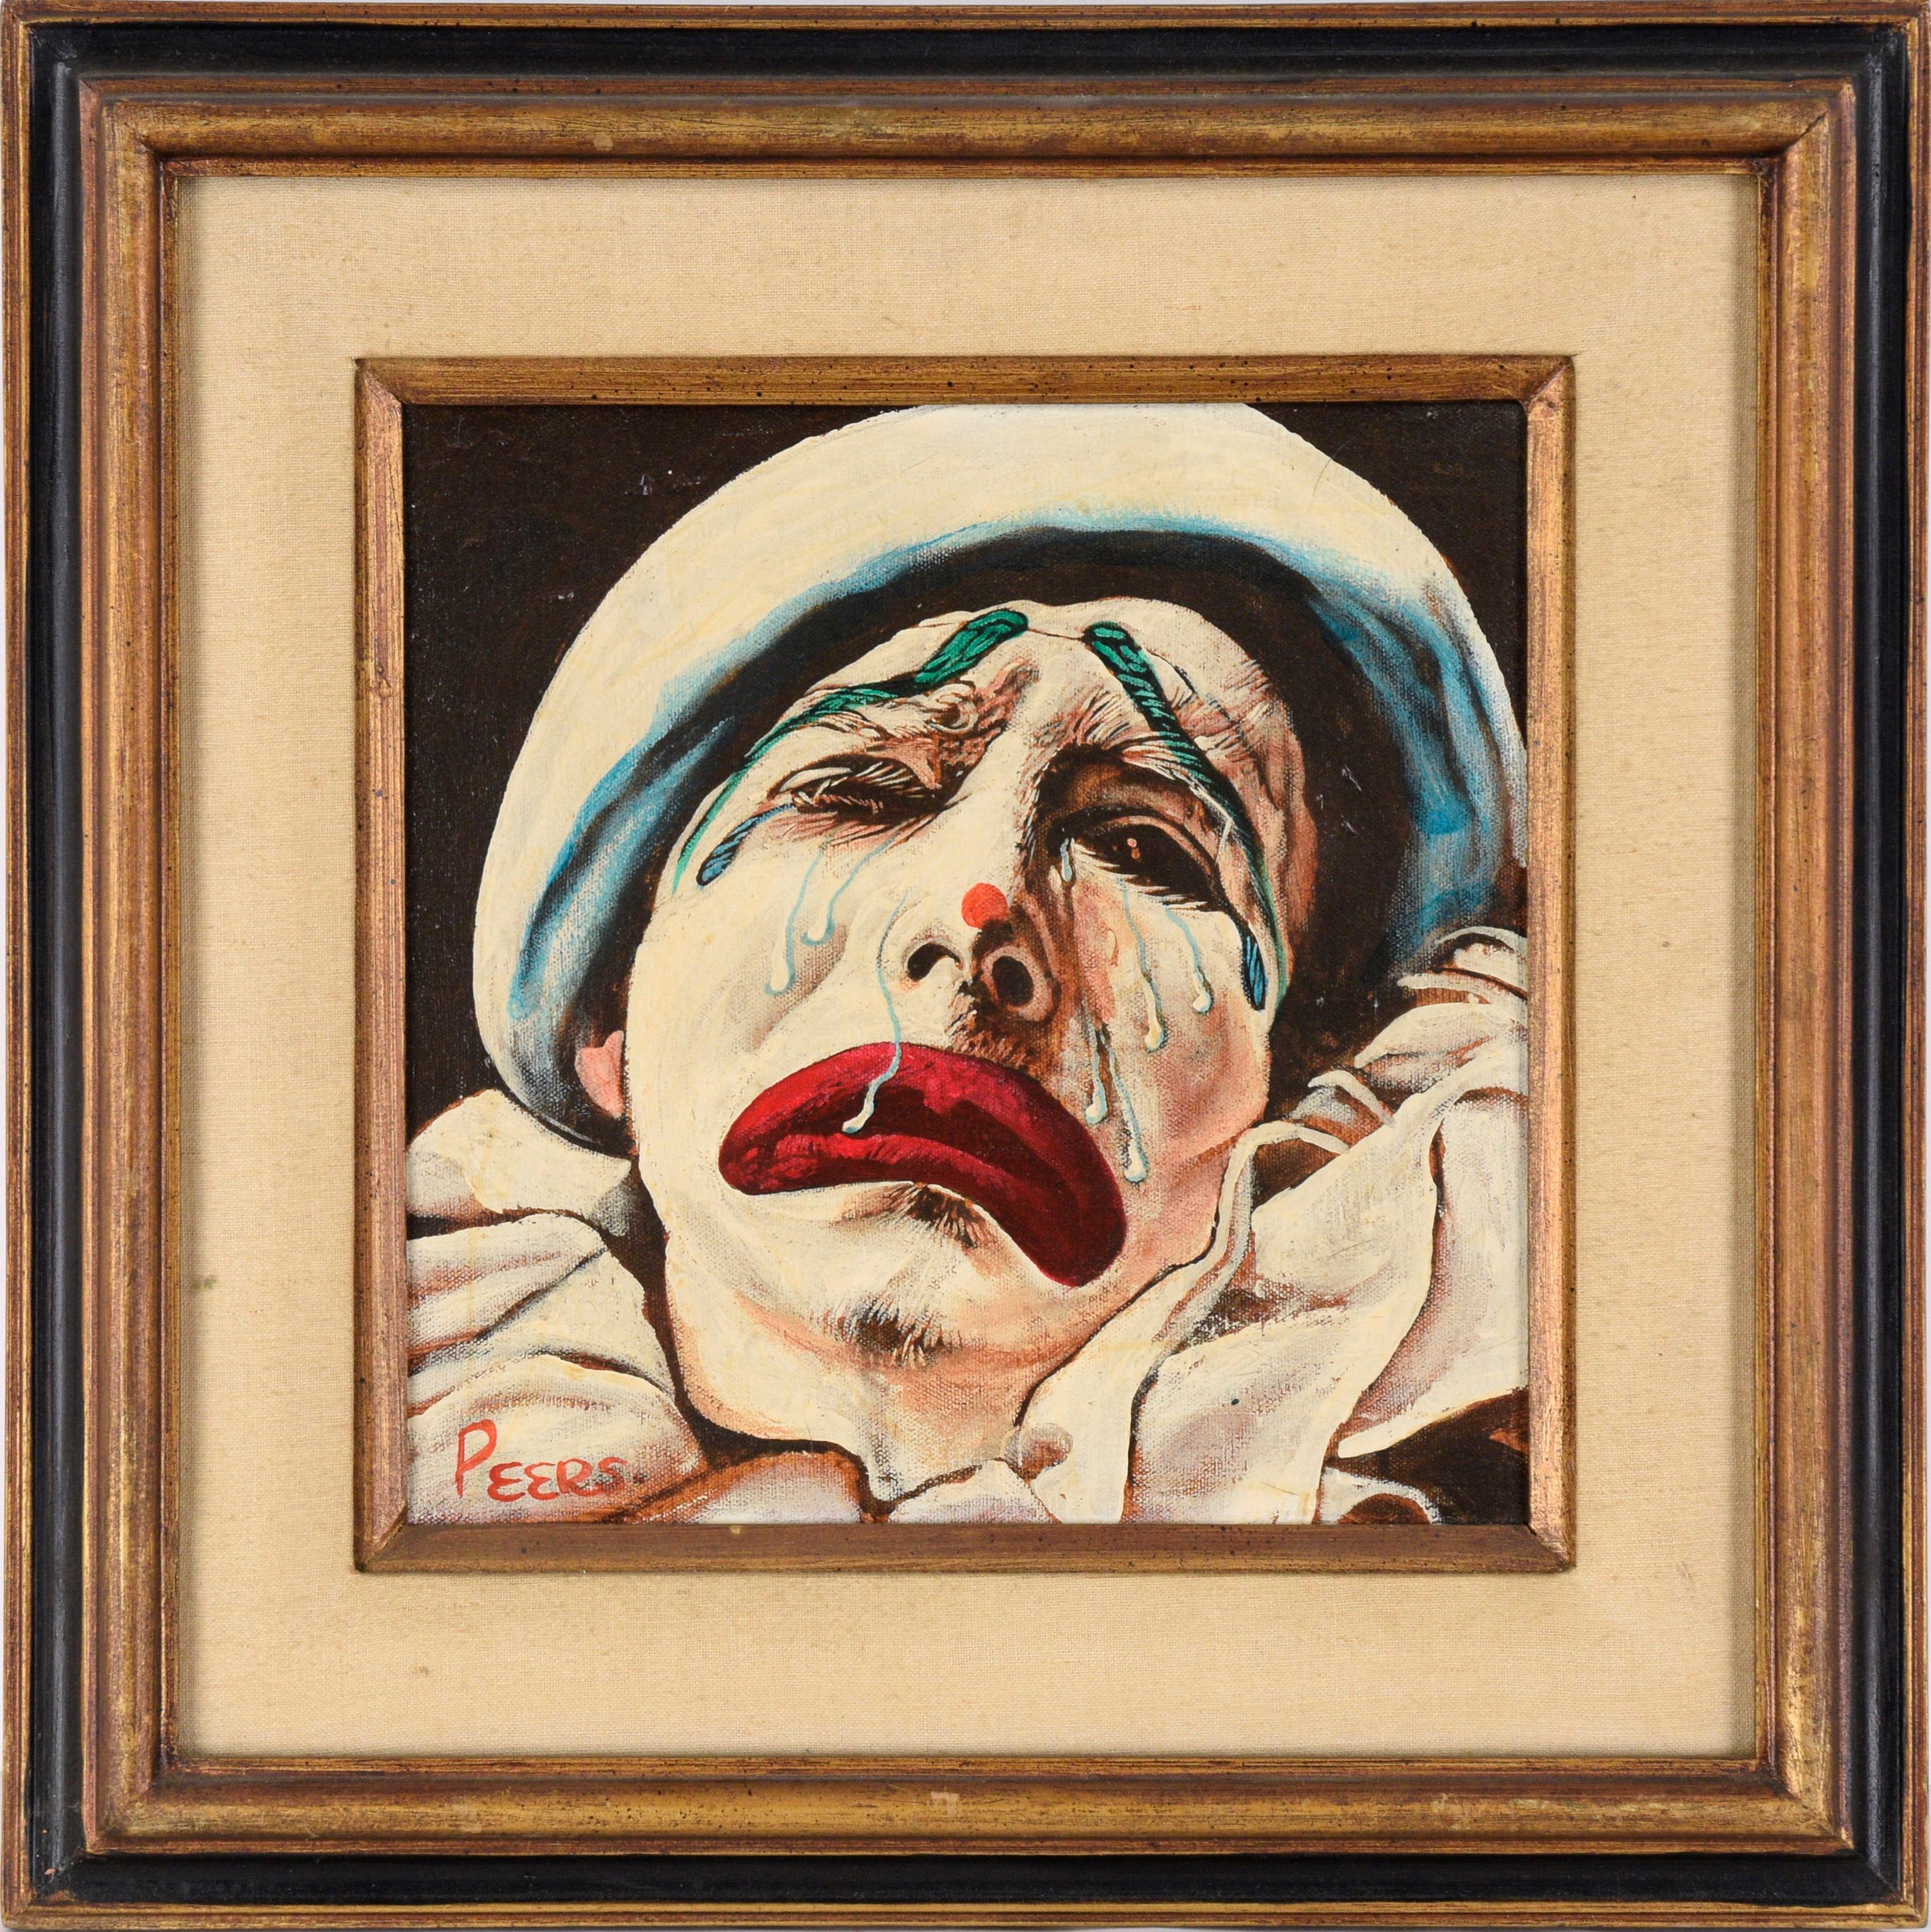 John Peers Portrait Painting - Crying Clown Portrait in Oil on Canvas